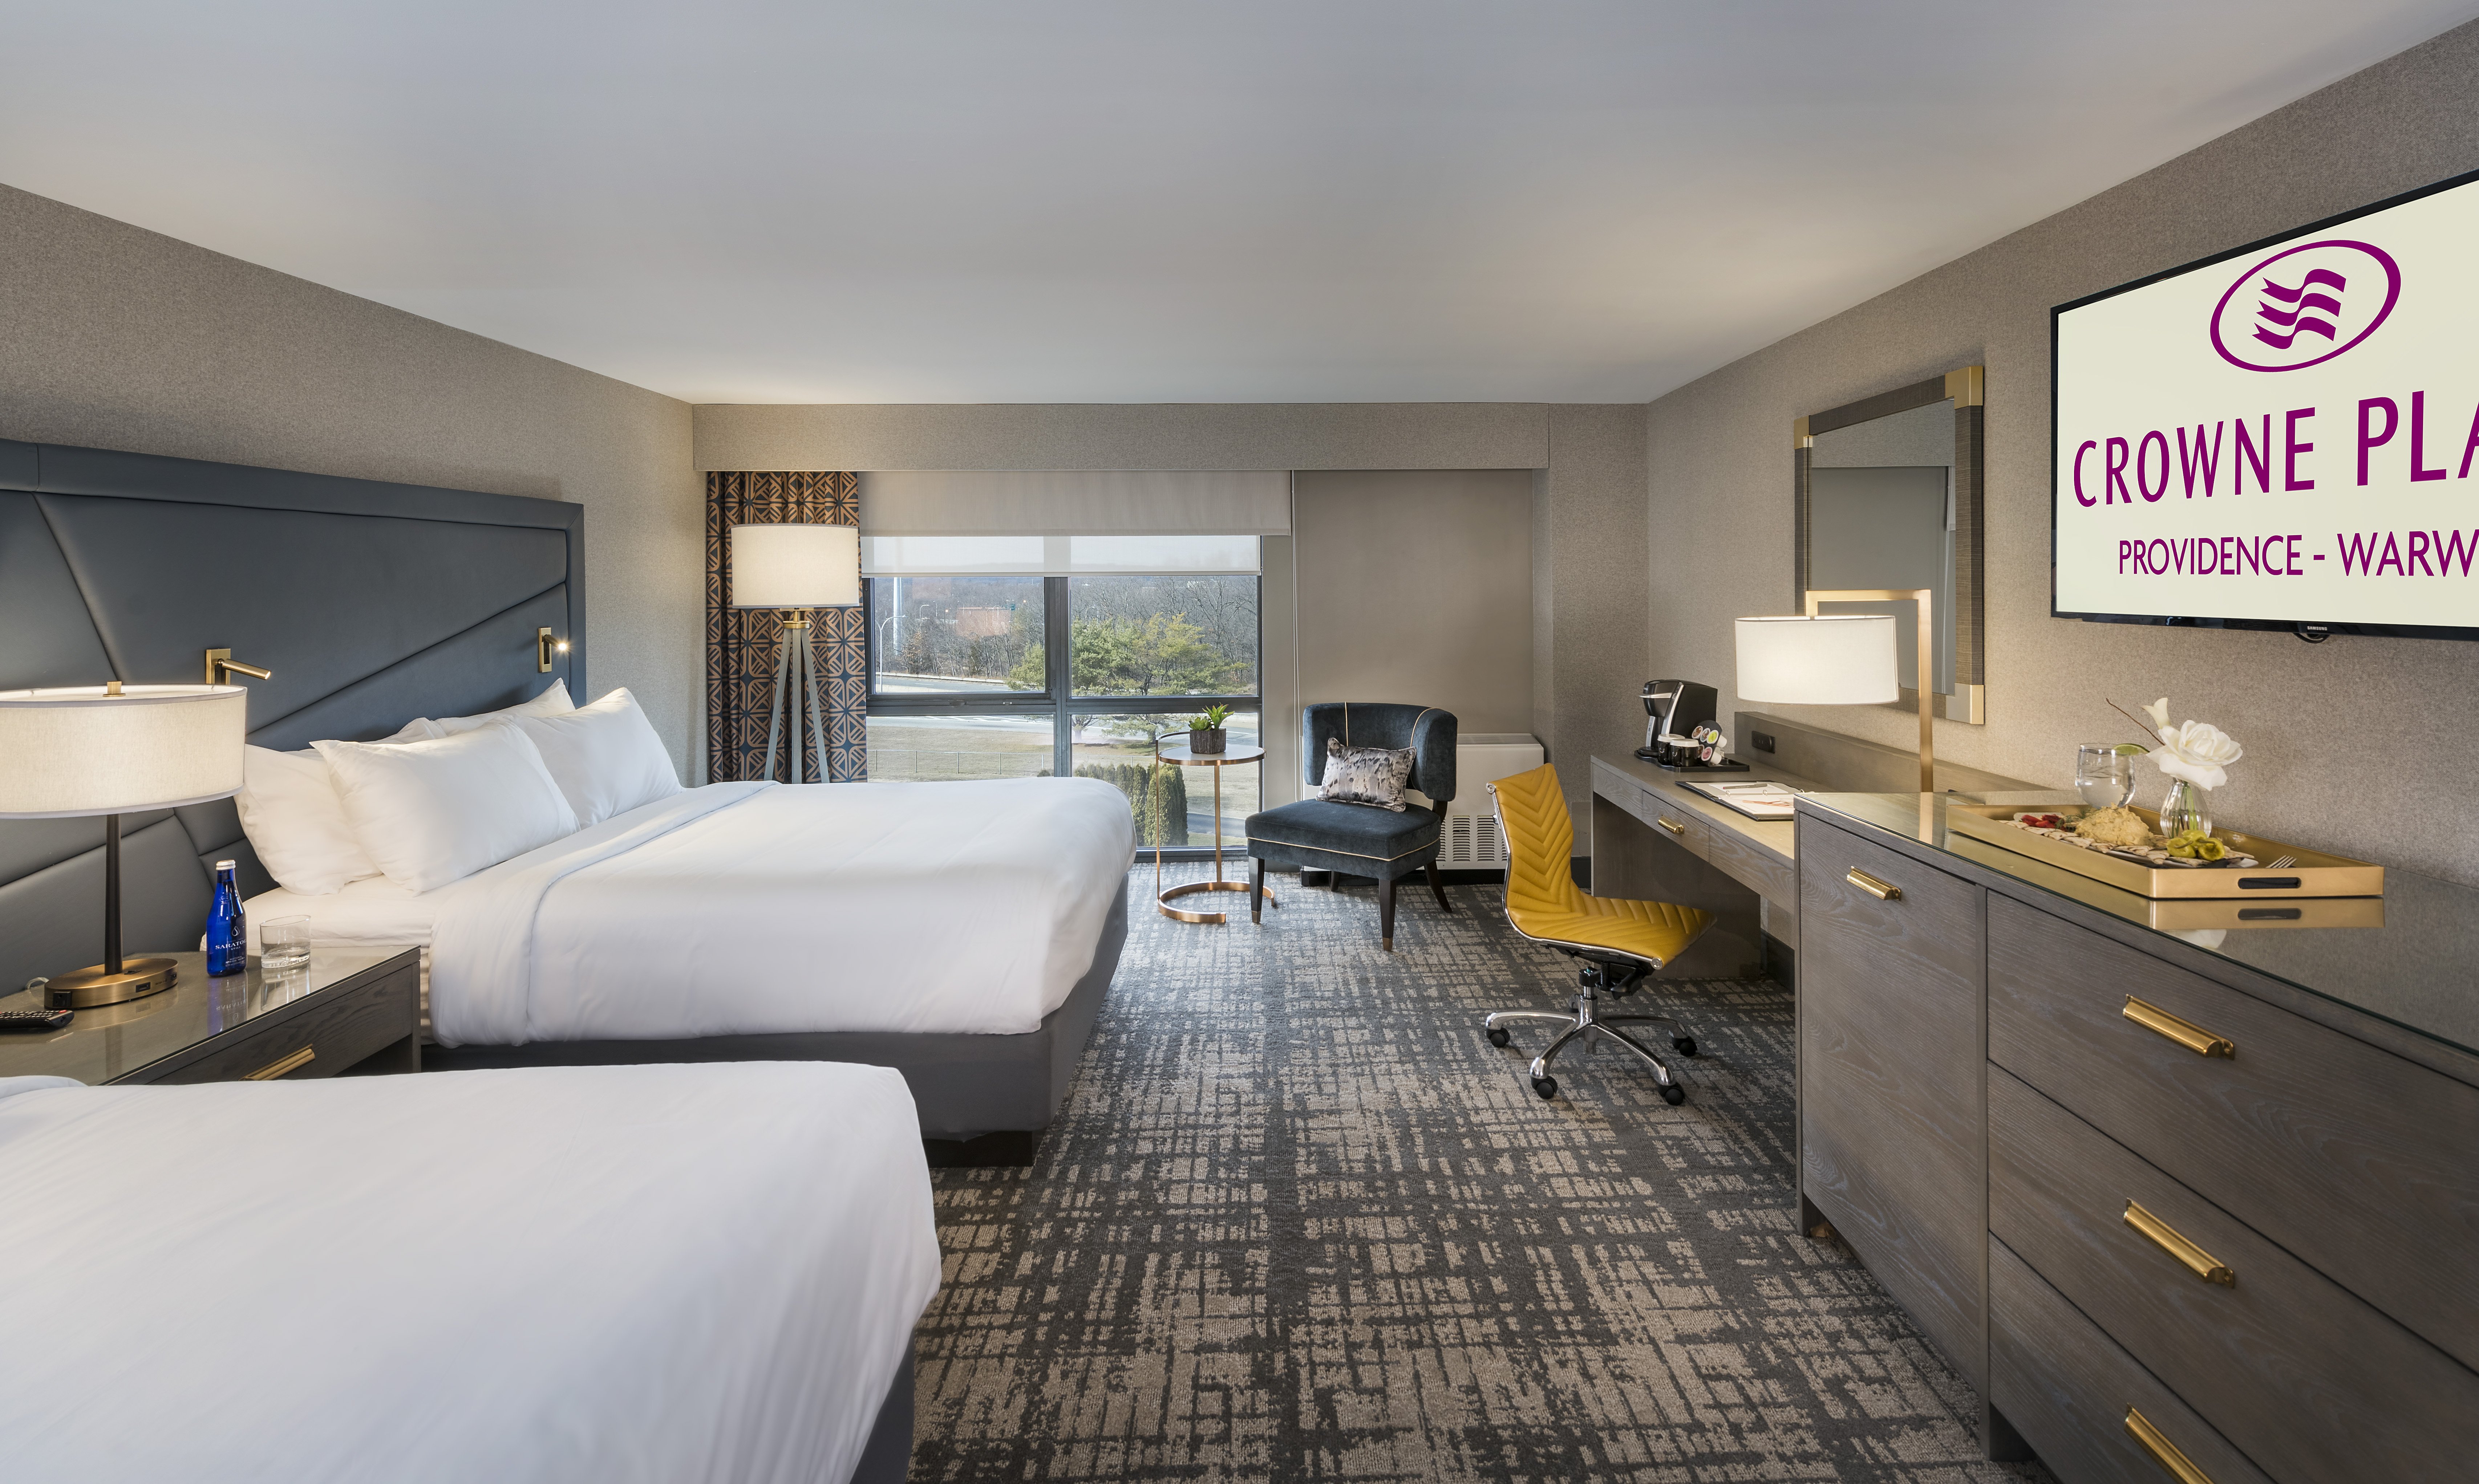 Our amazing two-queen-bed guest room awaits you!